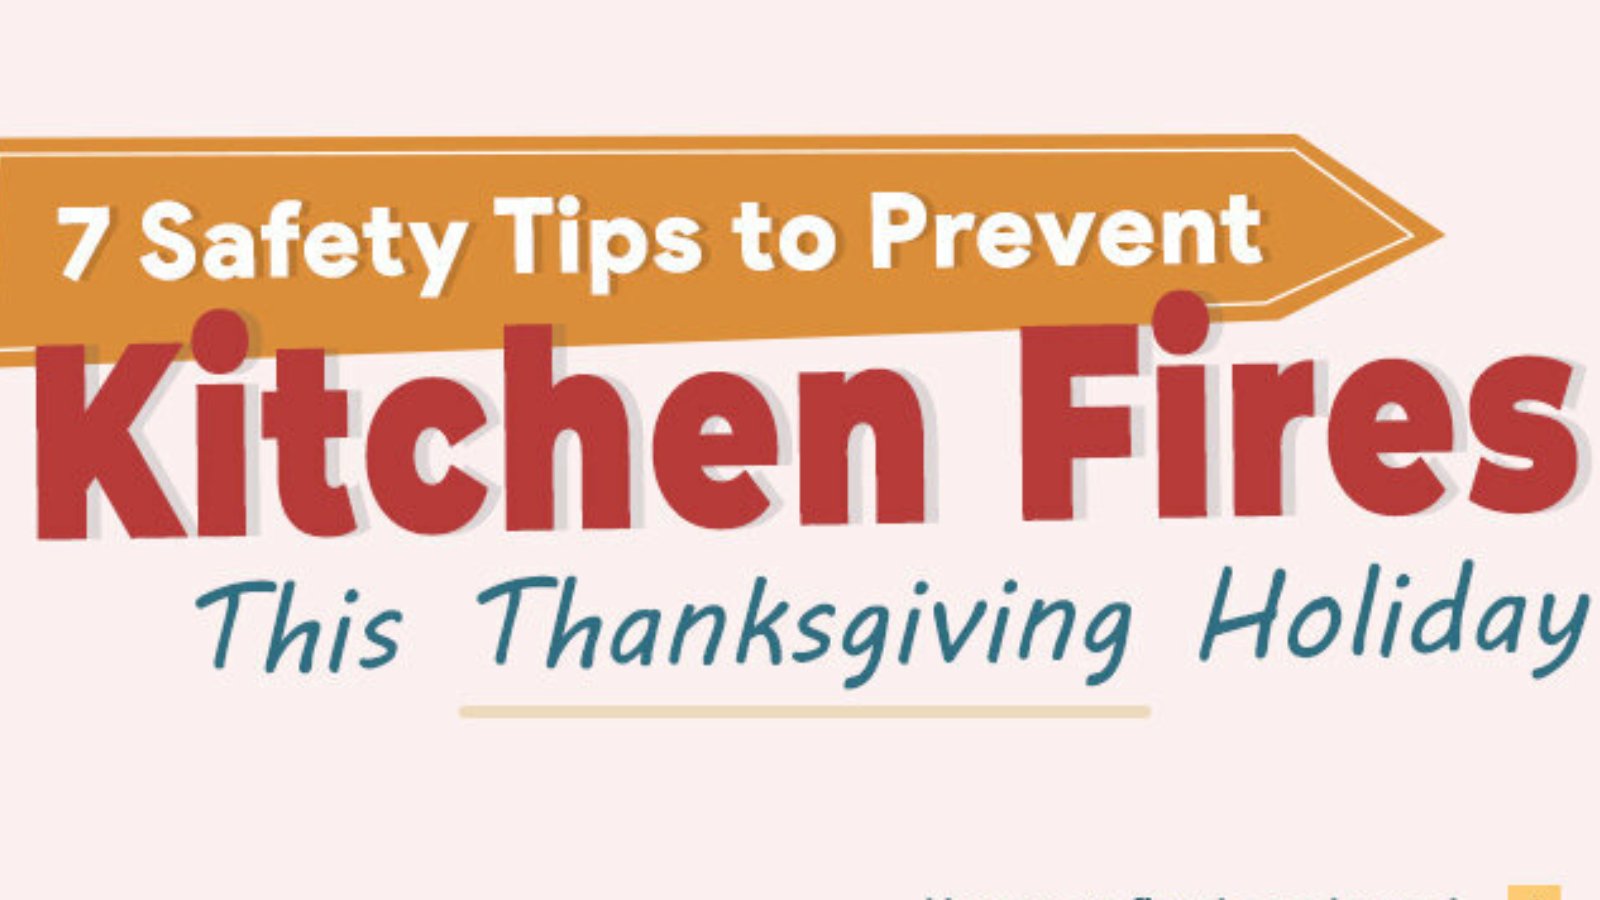 7 Safety Tips to Prevent Kitchen Fires This Thanksgiving Holiday